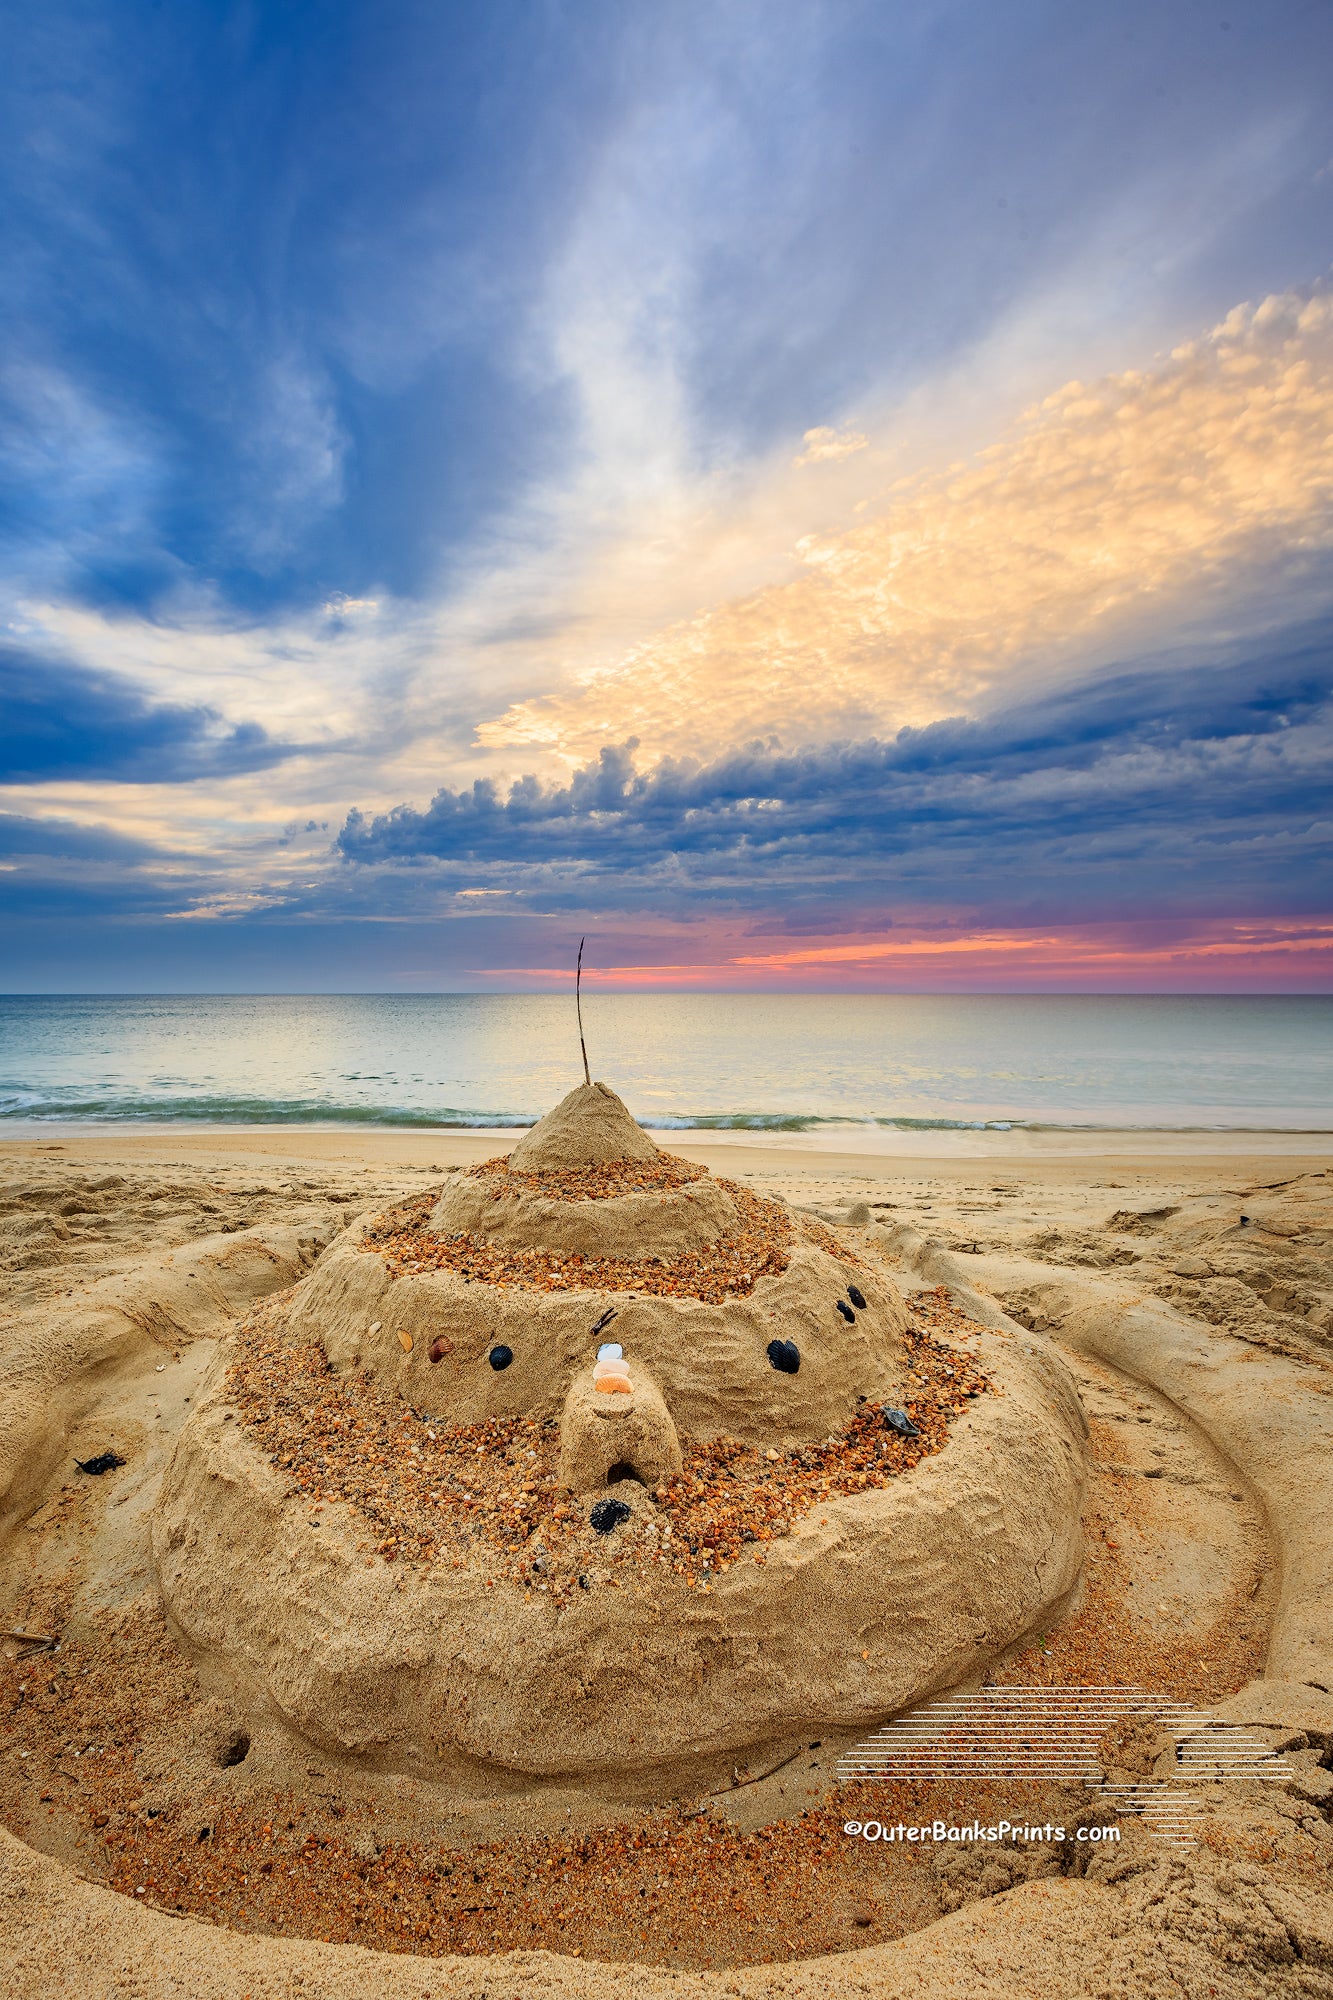 Sunrise sandcastle in Kitty Hawk, NC on the Outer Banks.